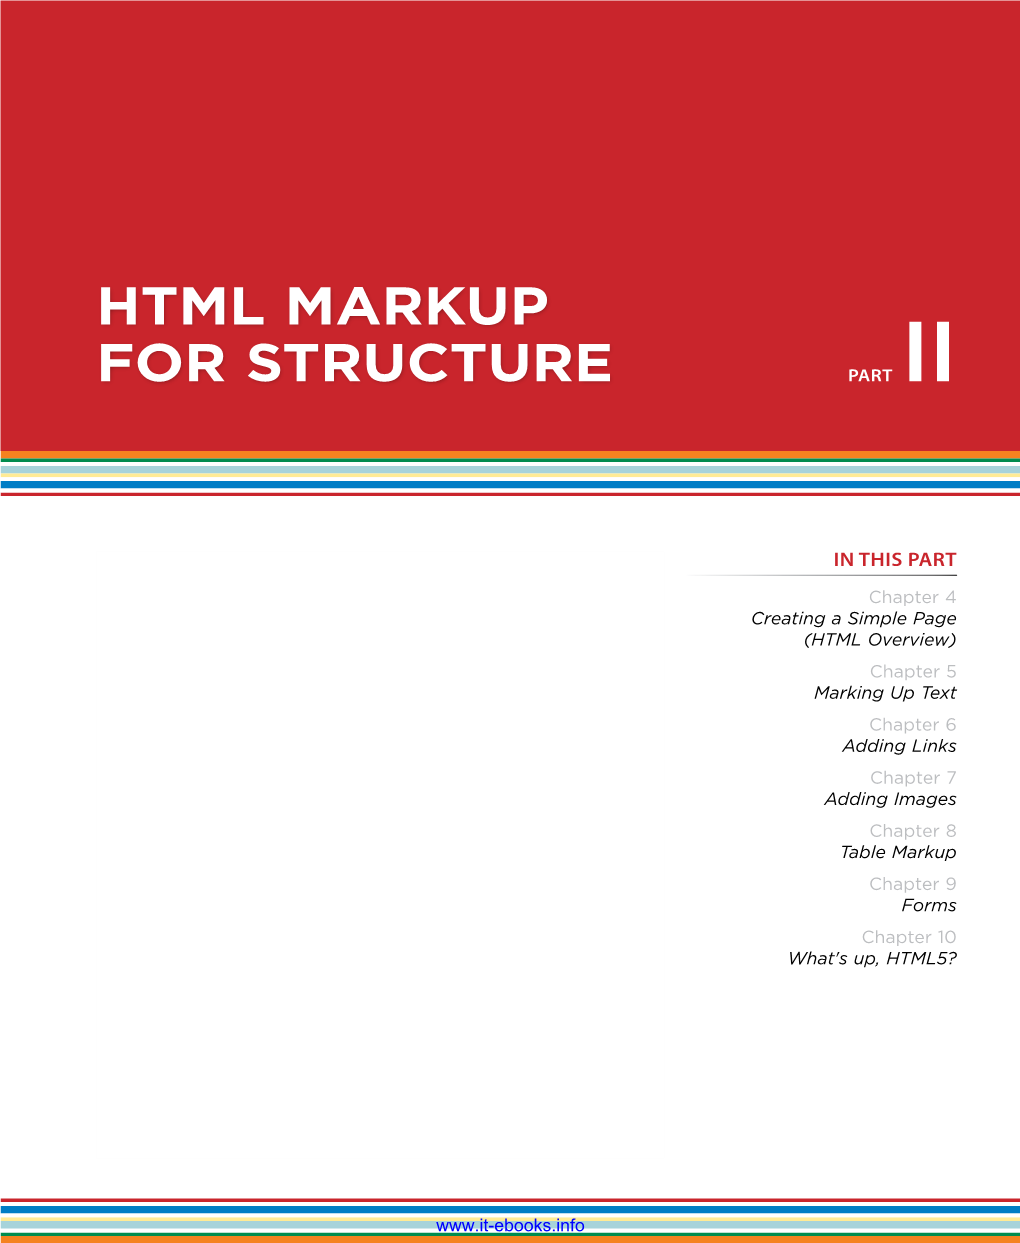 HTML Markup for Structure Part II